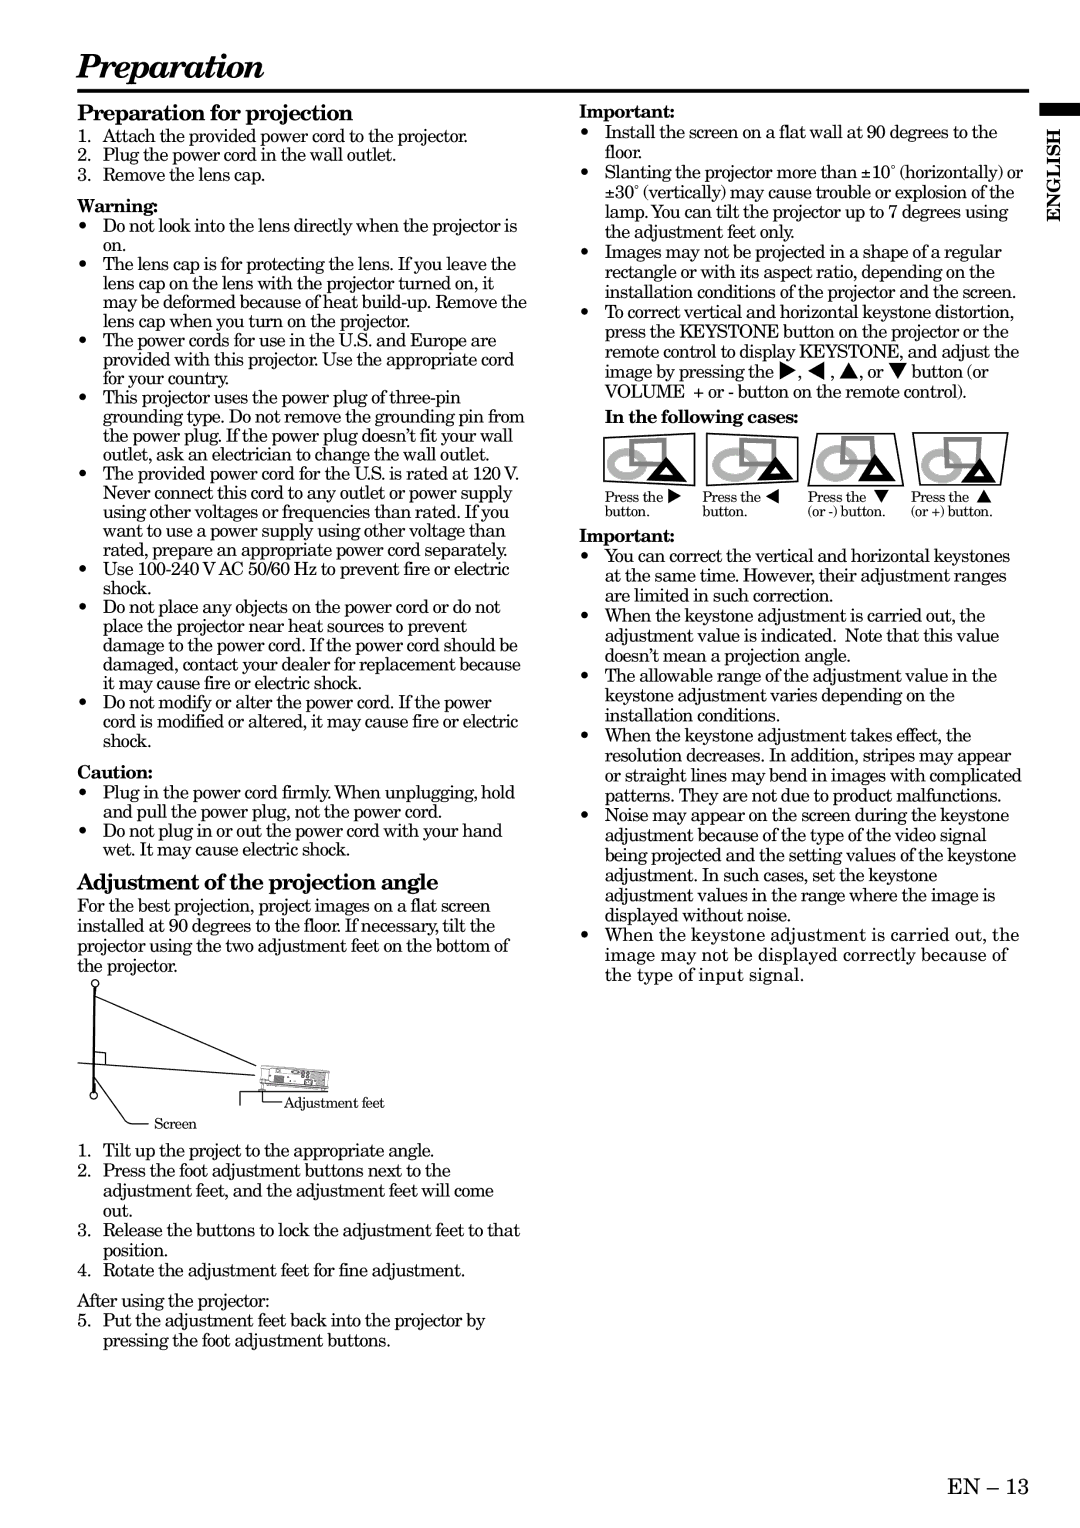 Mitsubishi Electronics HC3 user manual Preparation for projection, Adjustment of the projection angle, Following cases 